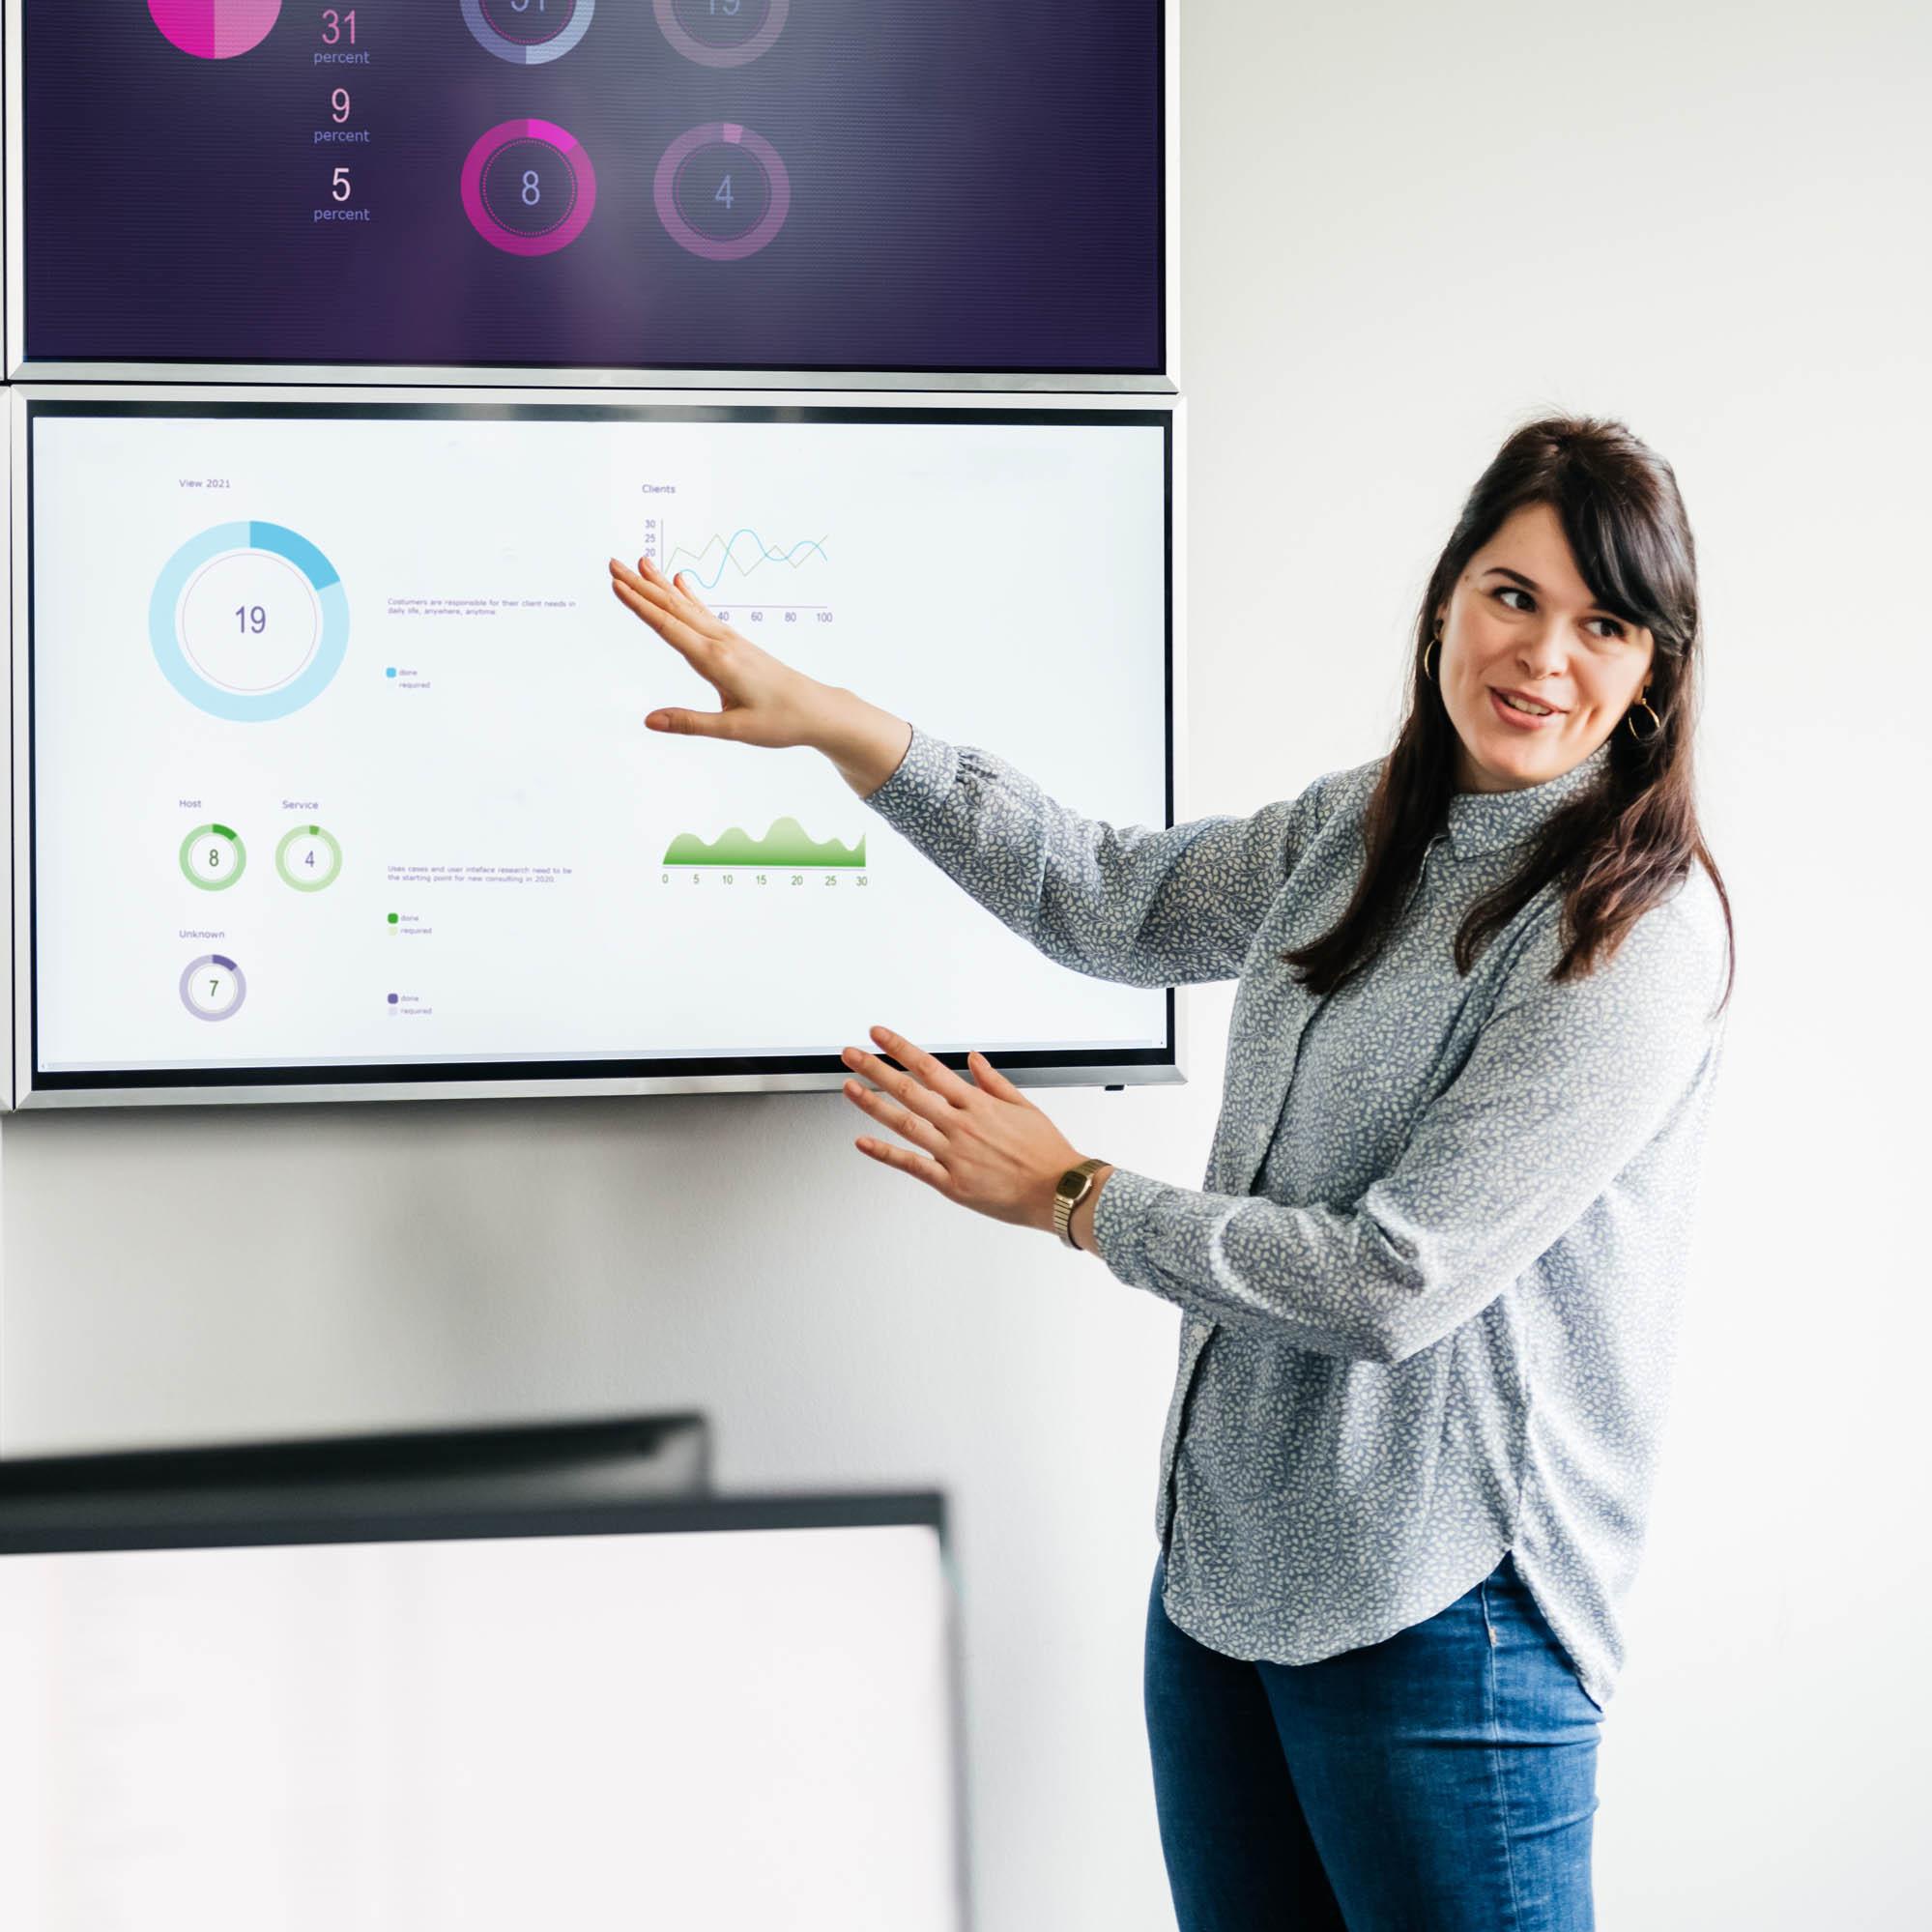 An image of a woman standing up referencing charts and graphics on a board